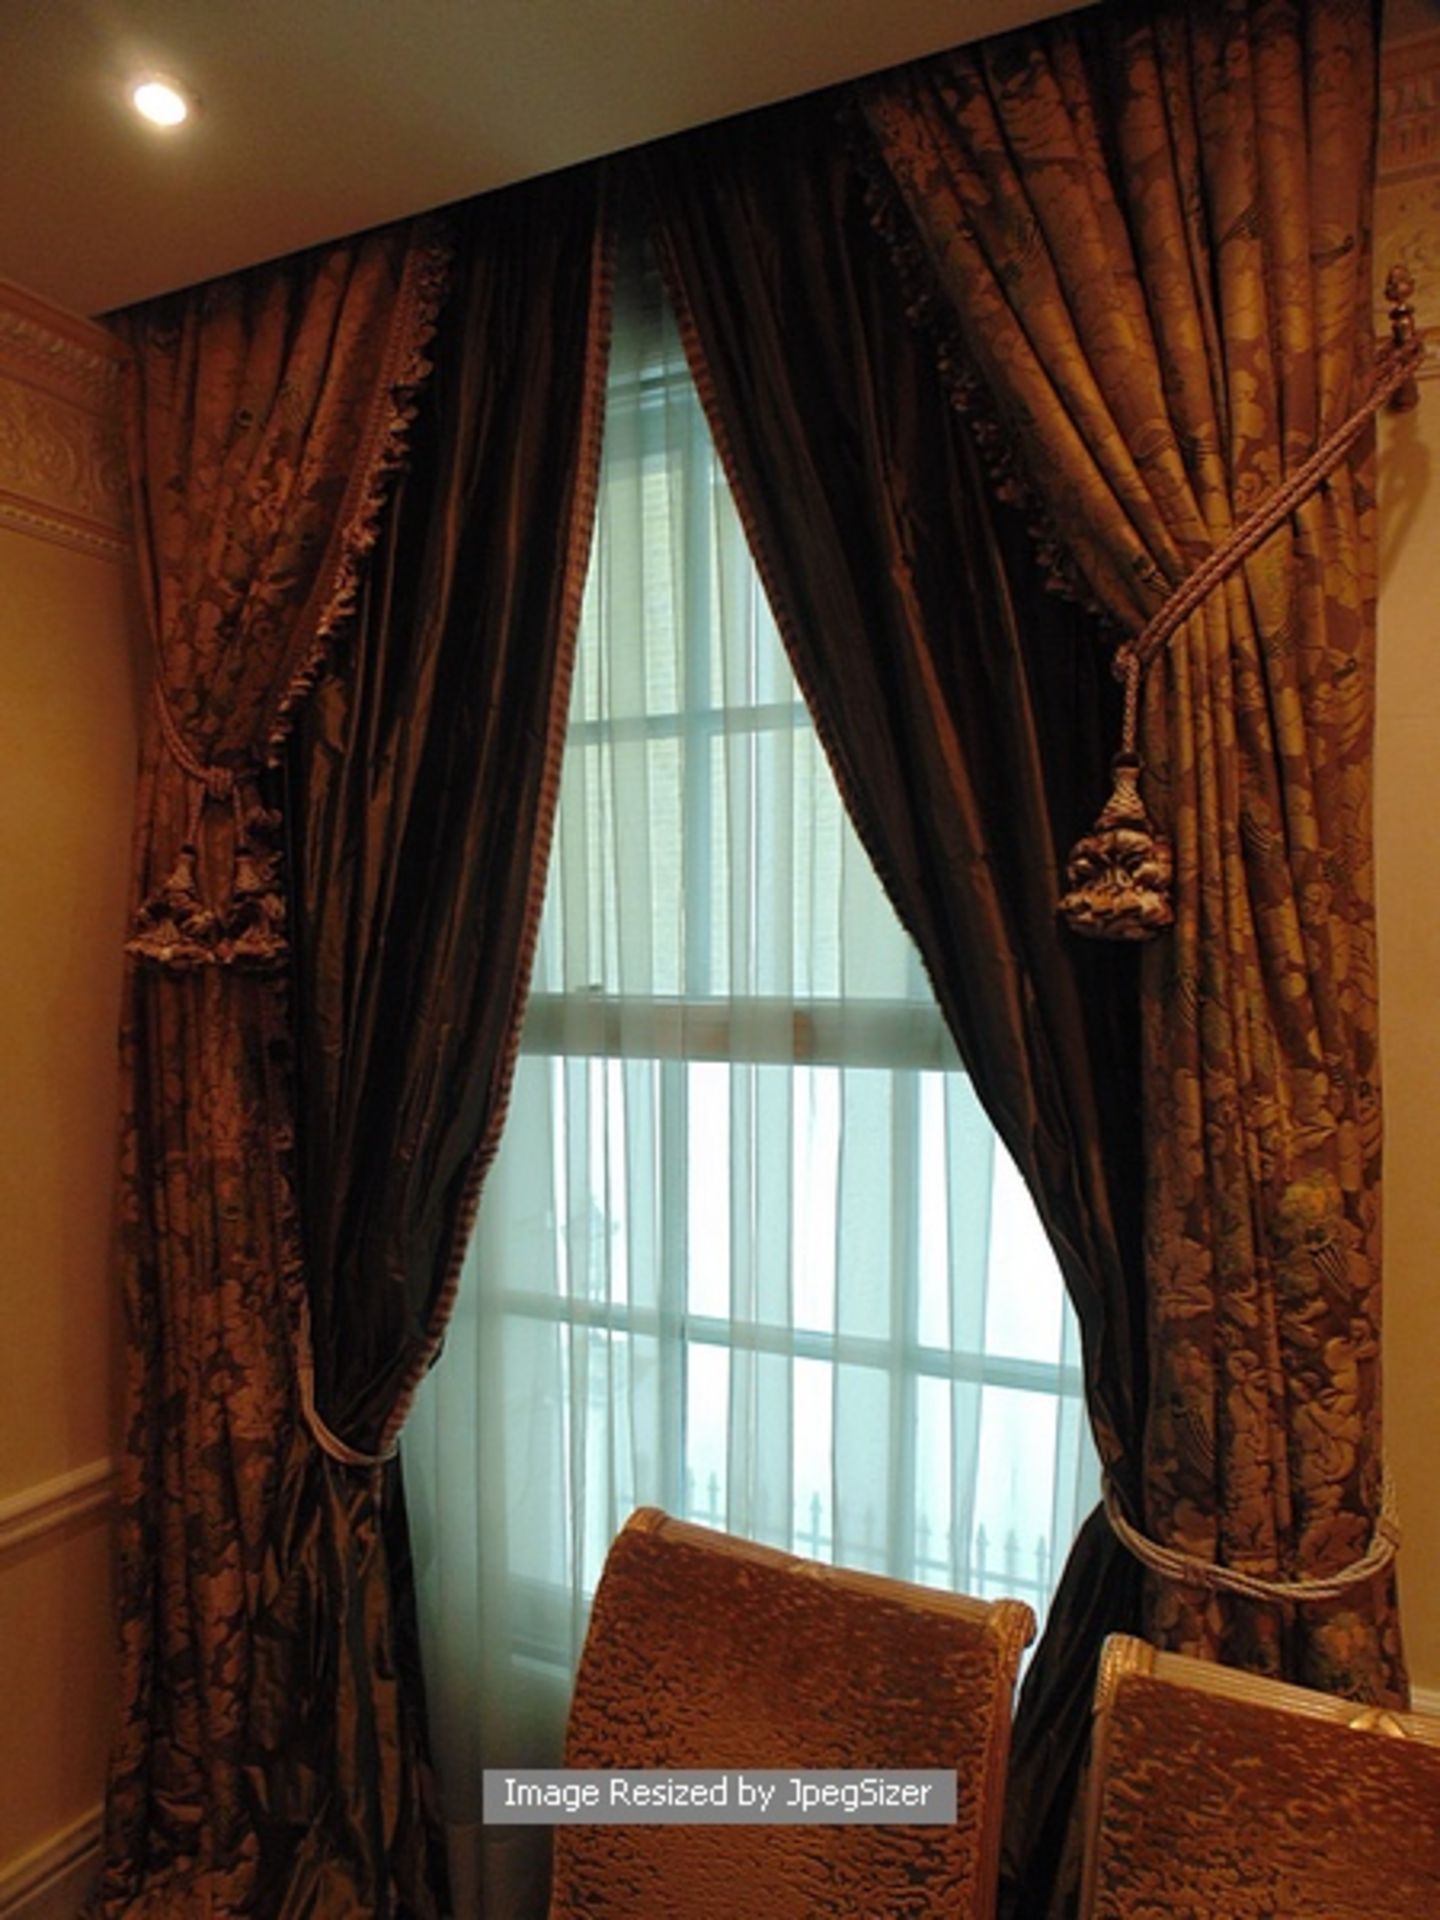 A pair of gold curtains supplied by Jacquard, gold fabric from Marvi complete with decorated